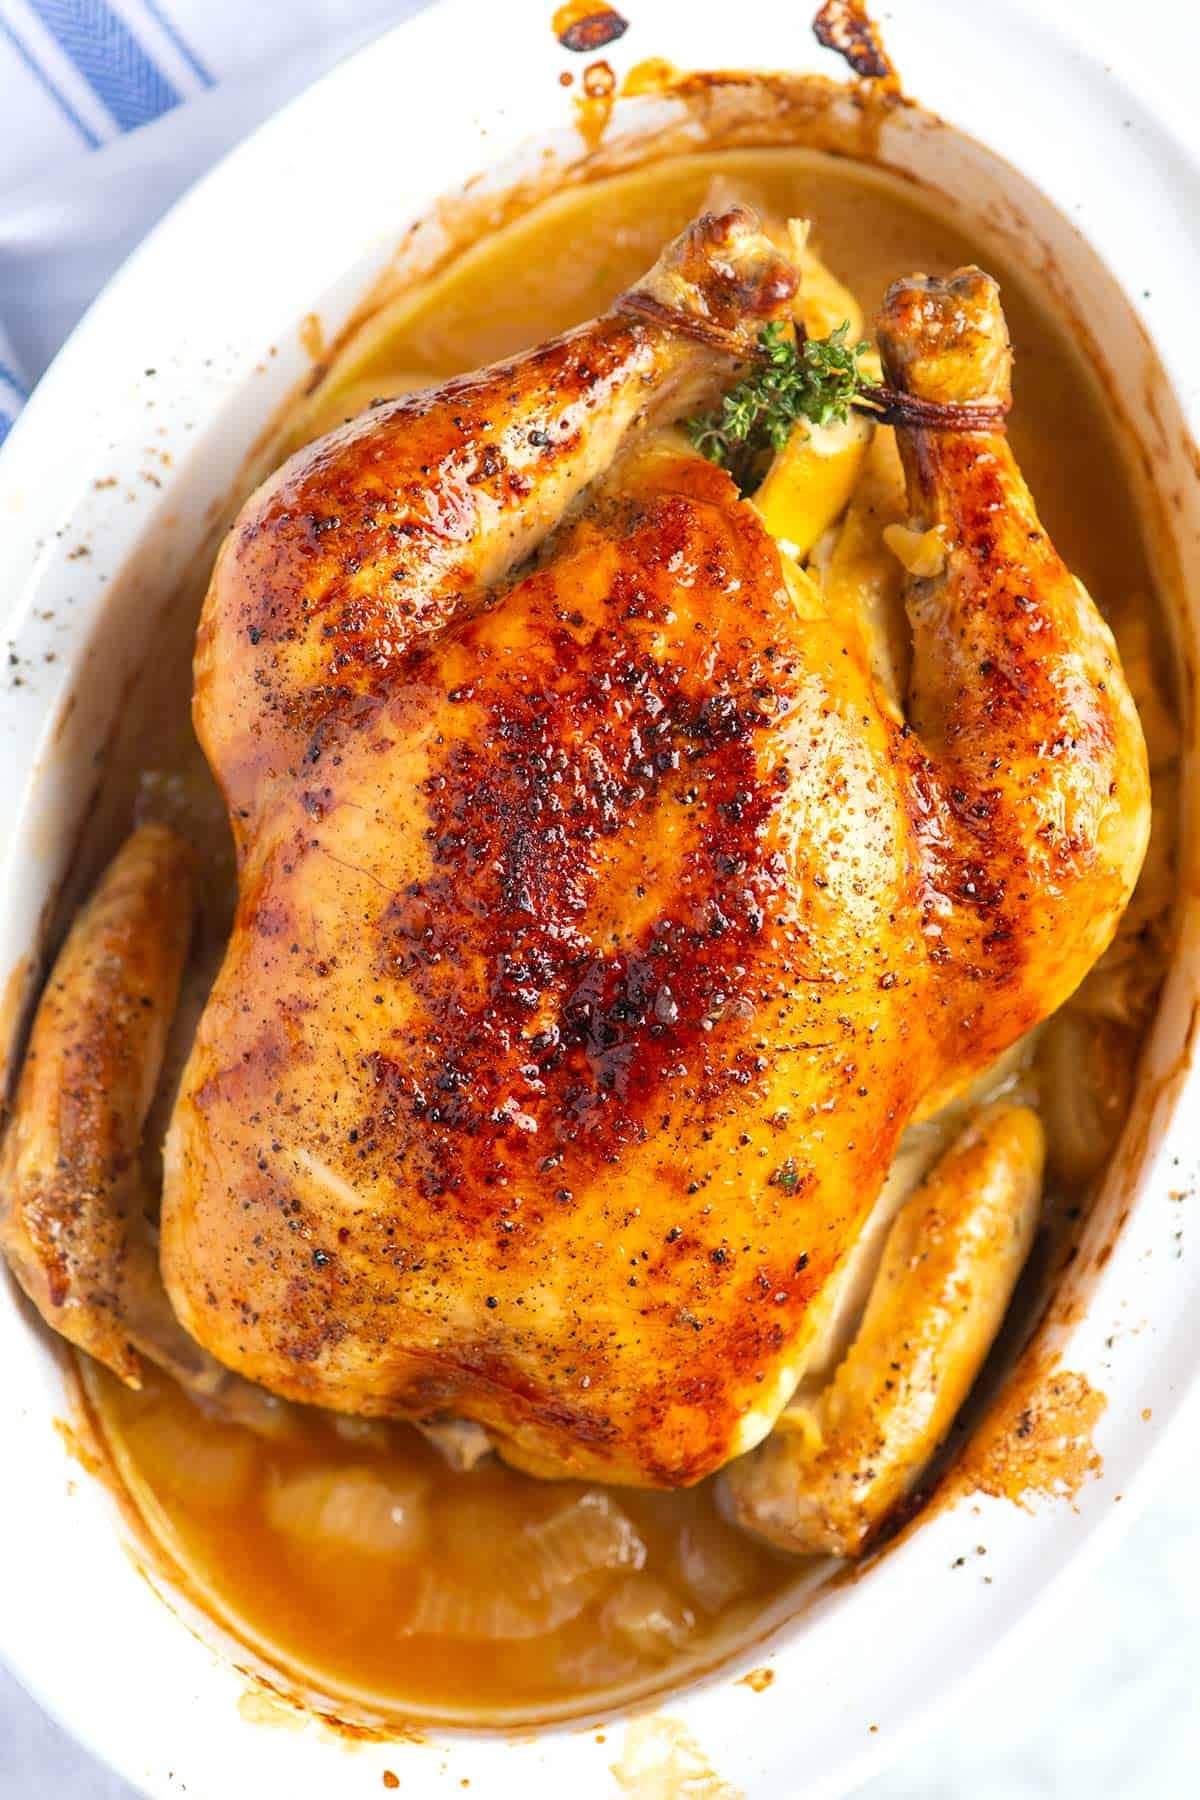 How to cook chicken in the oven - Tuko.co.ke